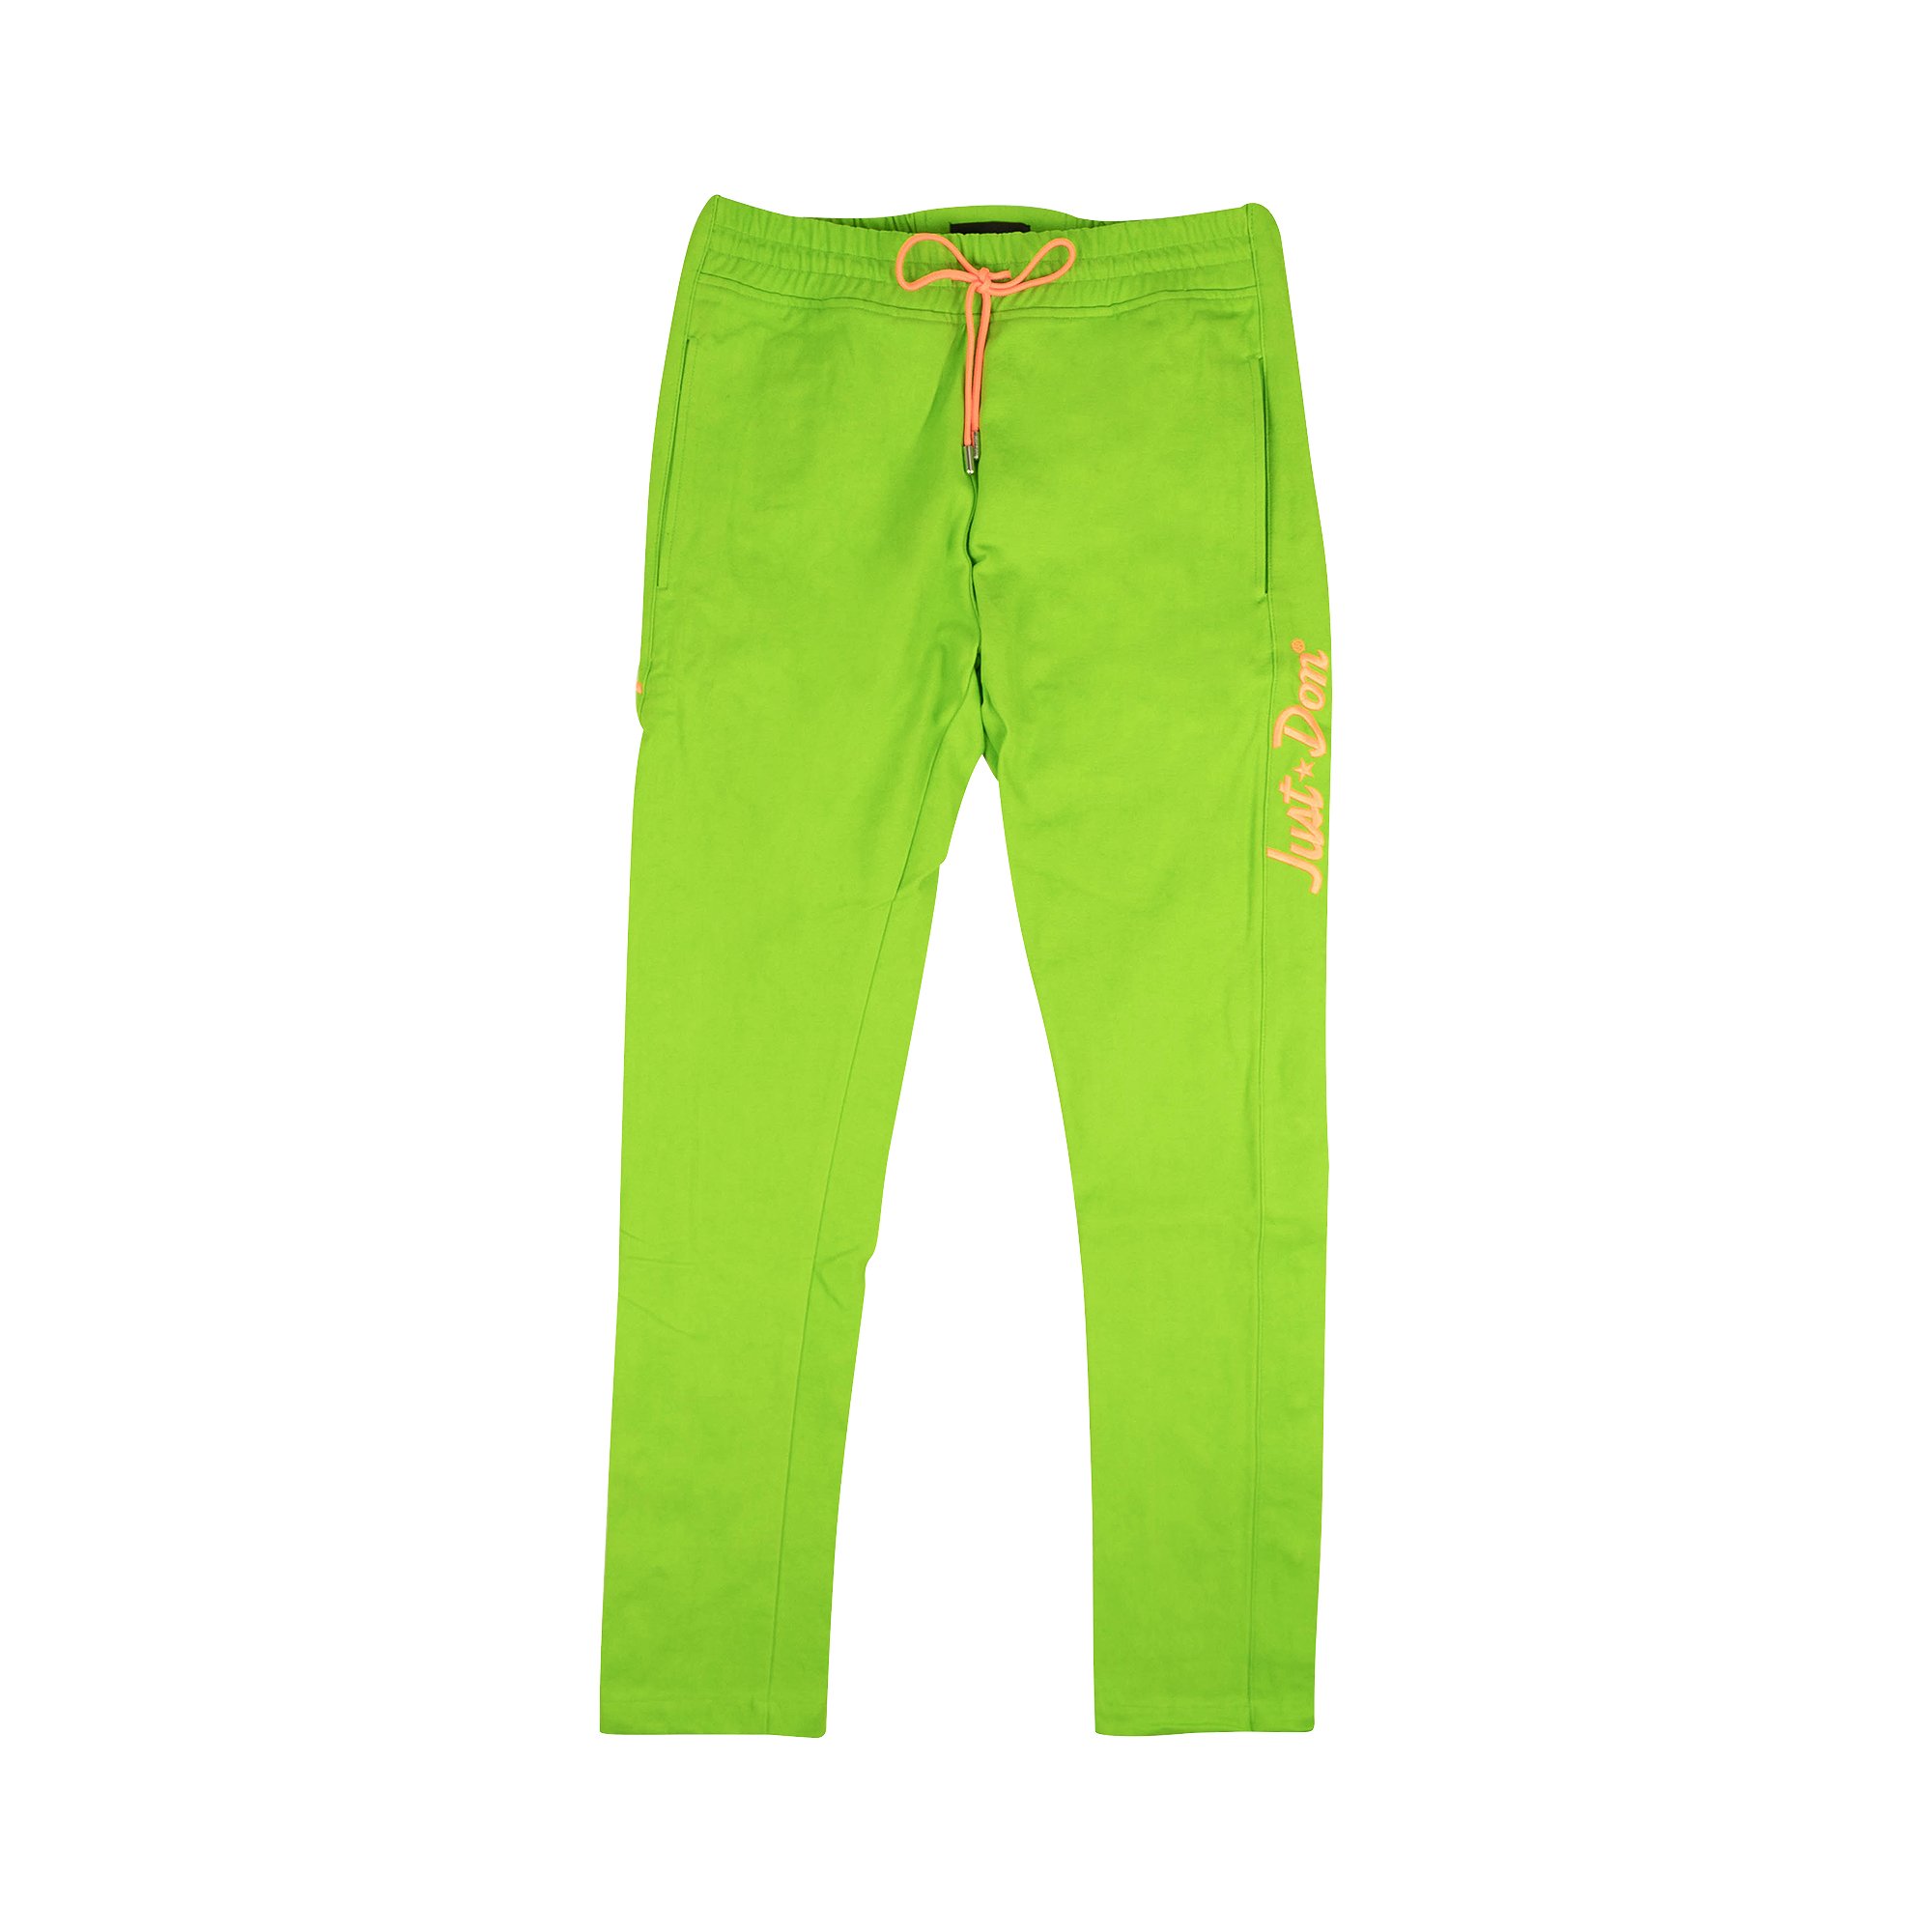 Buy Just Don Jungle Canvas Tearaway Pants 'Lime Green' - 4925